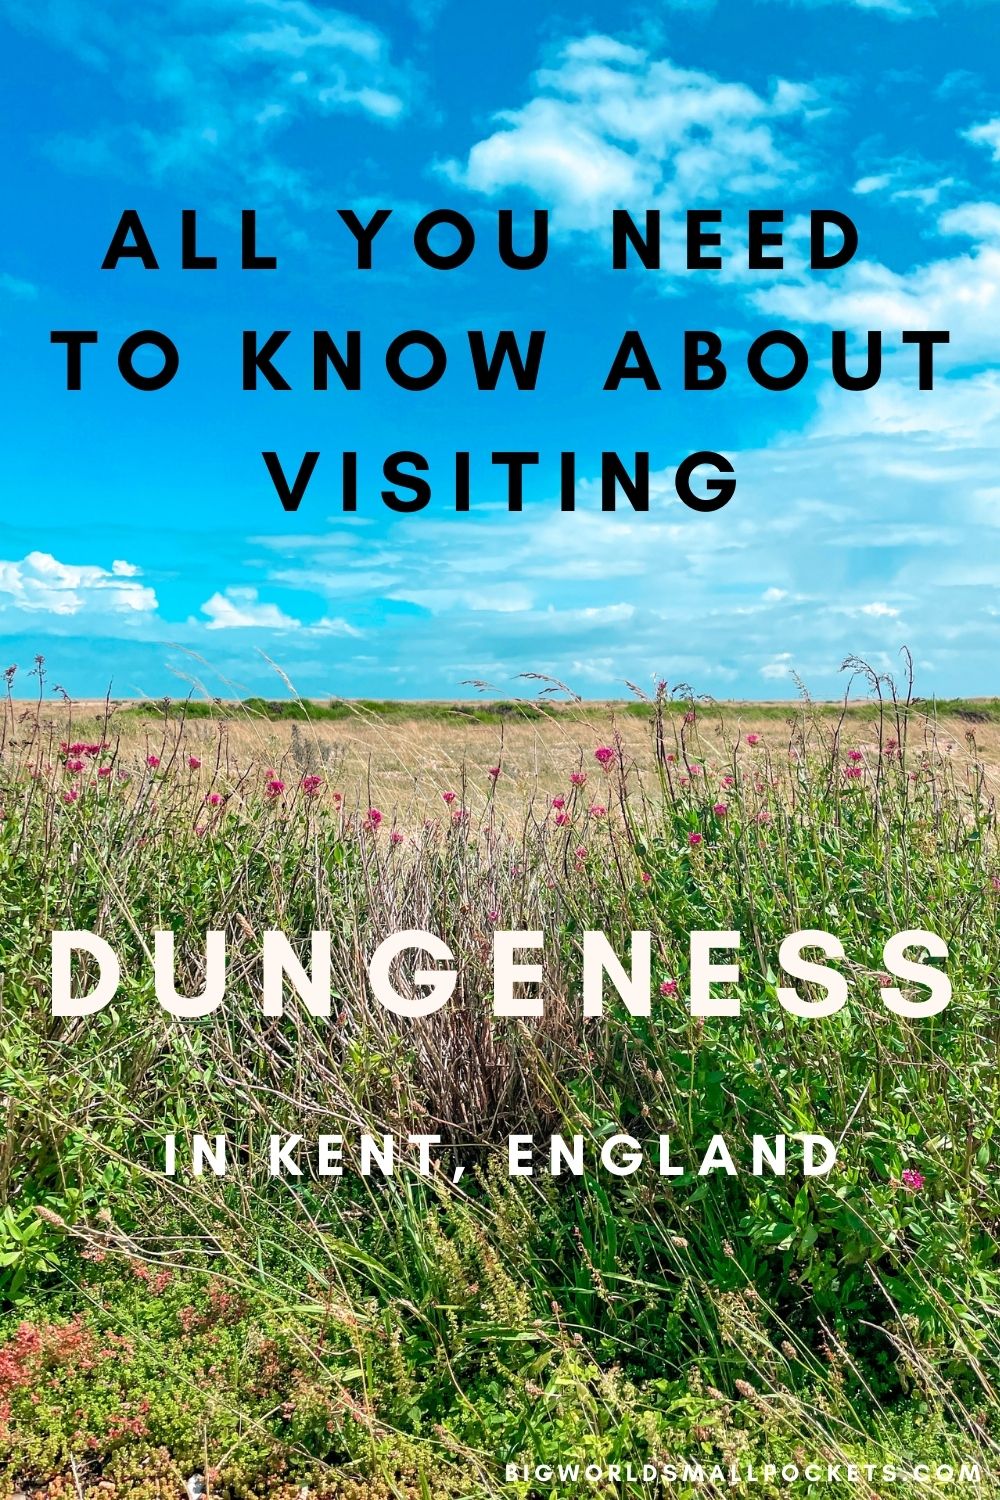 All You Need to Know About Visiting Dungeness in Kent, UK